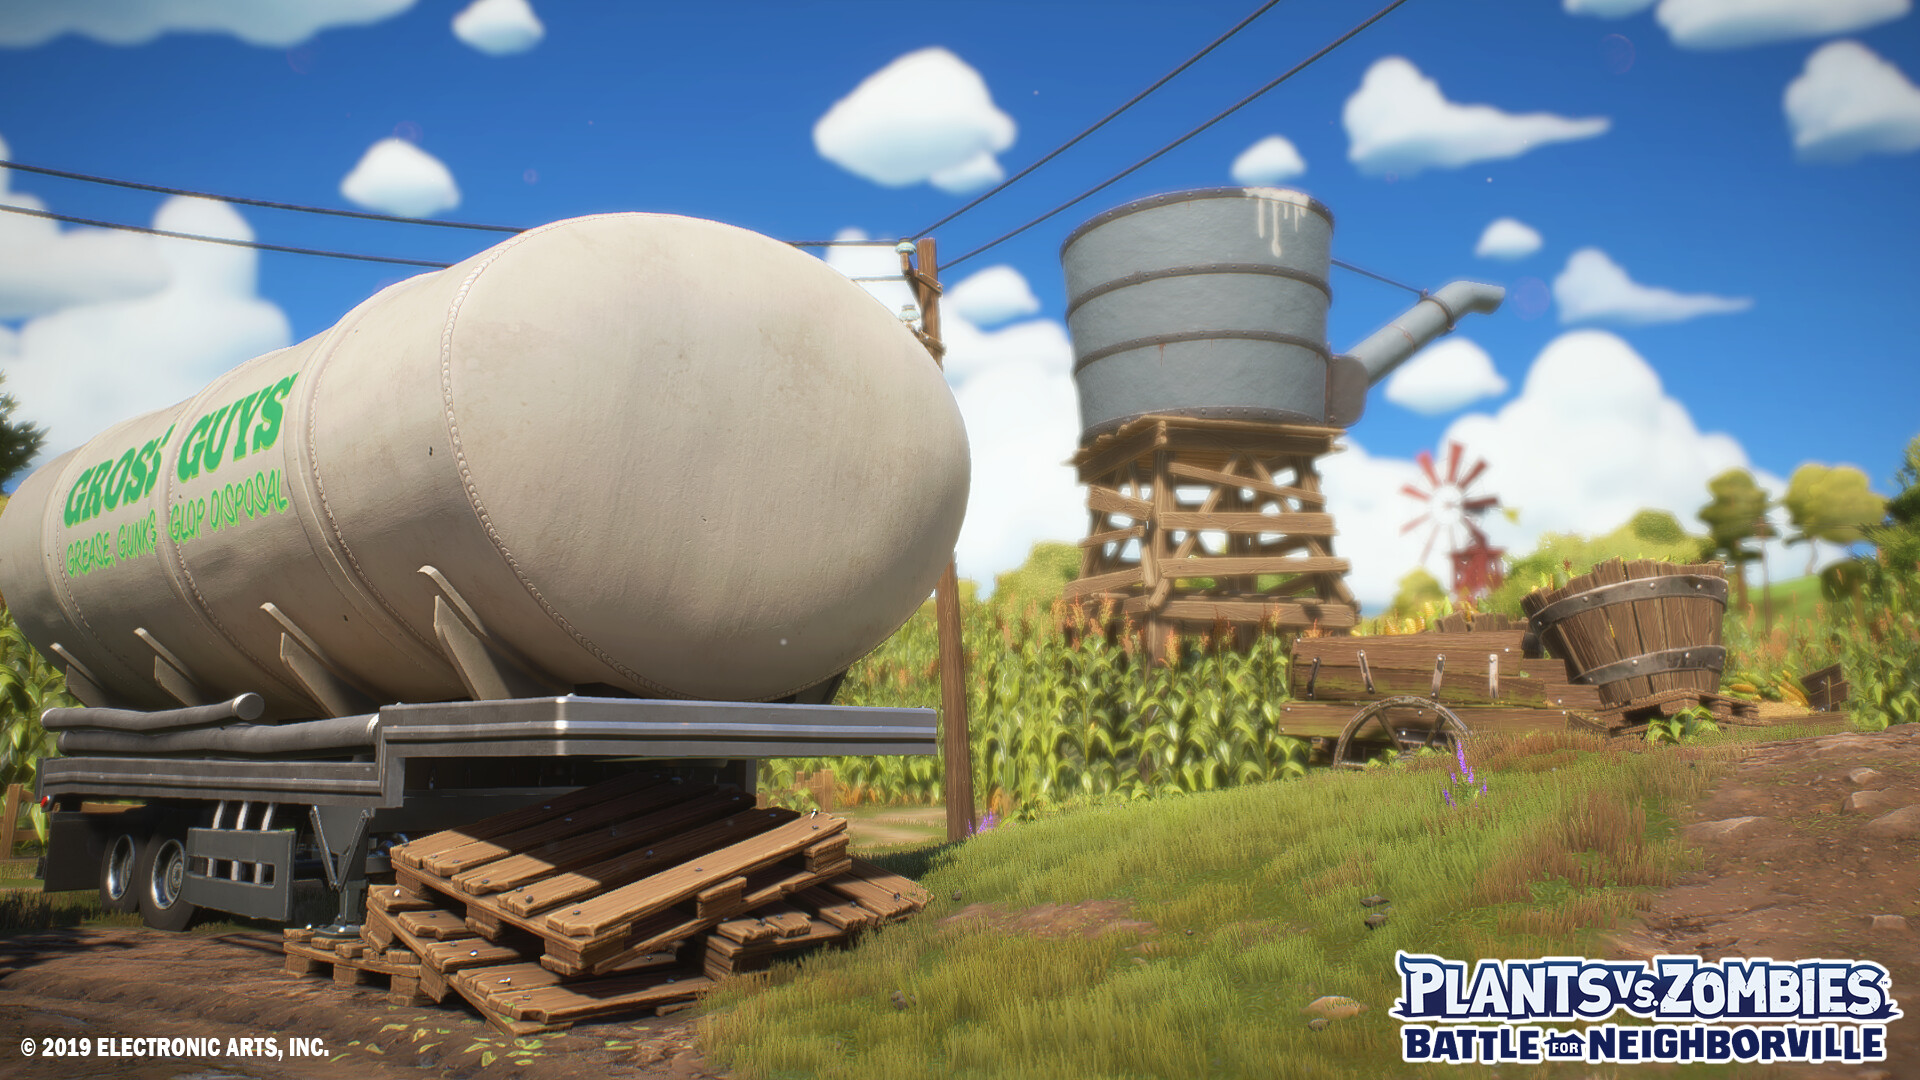 Plants vs Zombies: Battle for Neighborville's trailer and map have